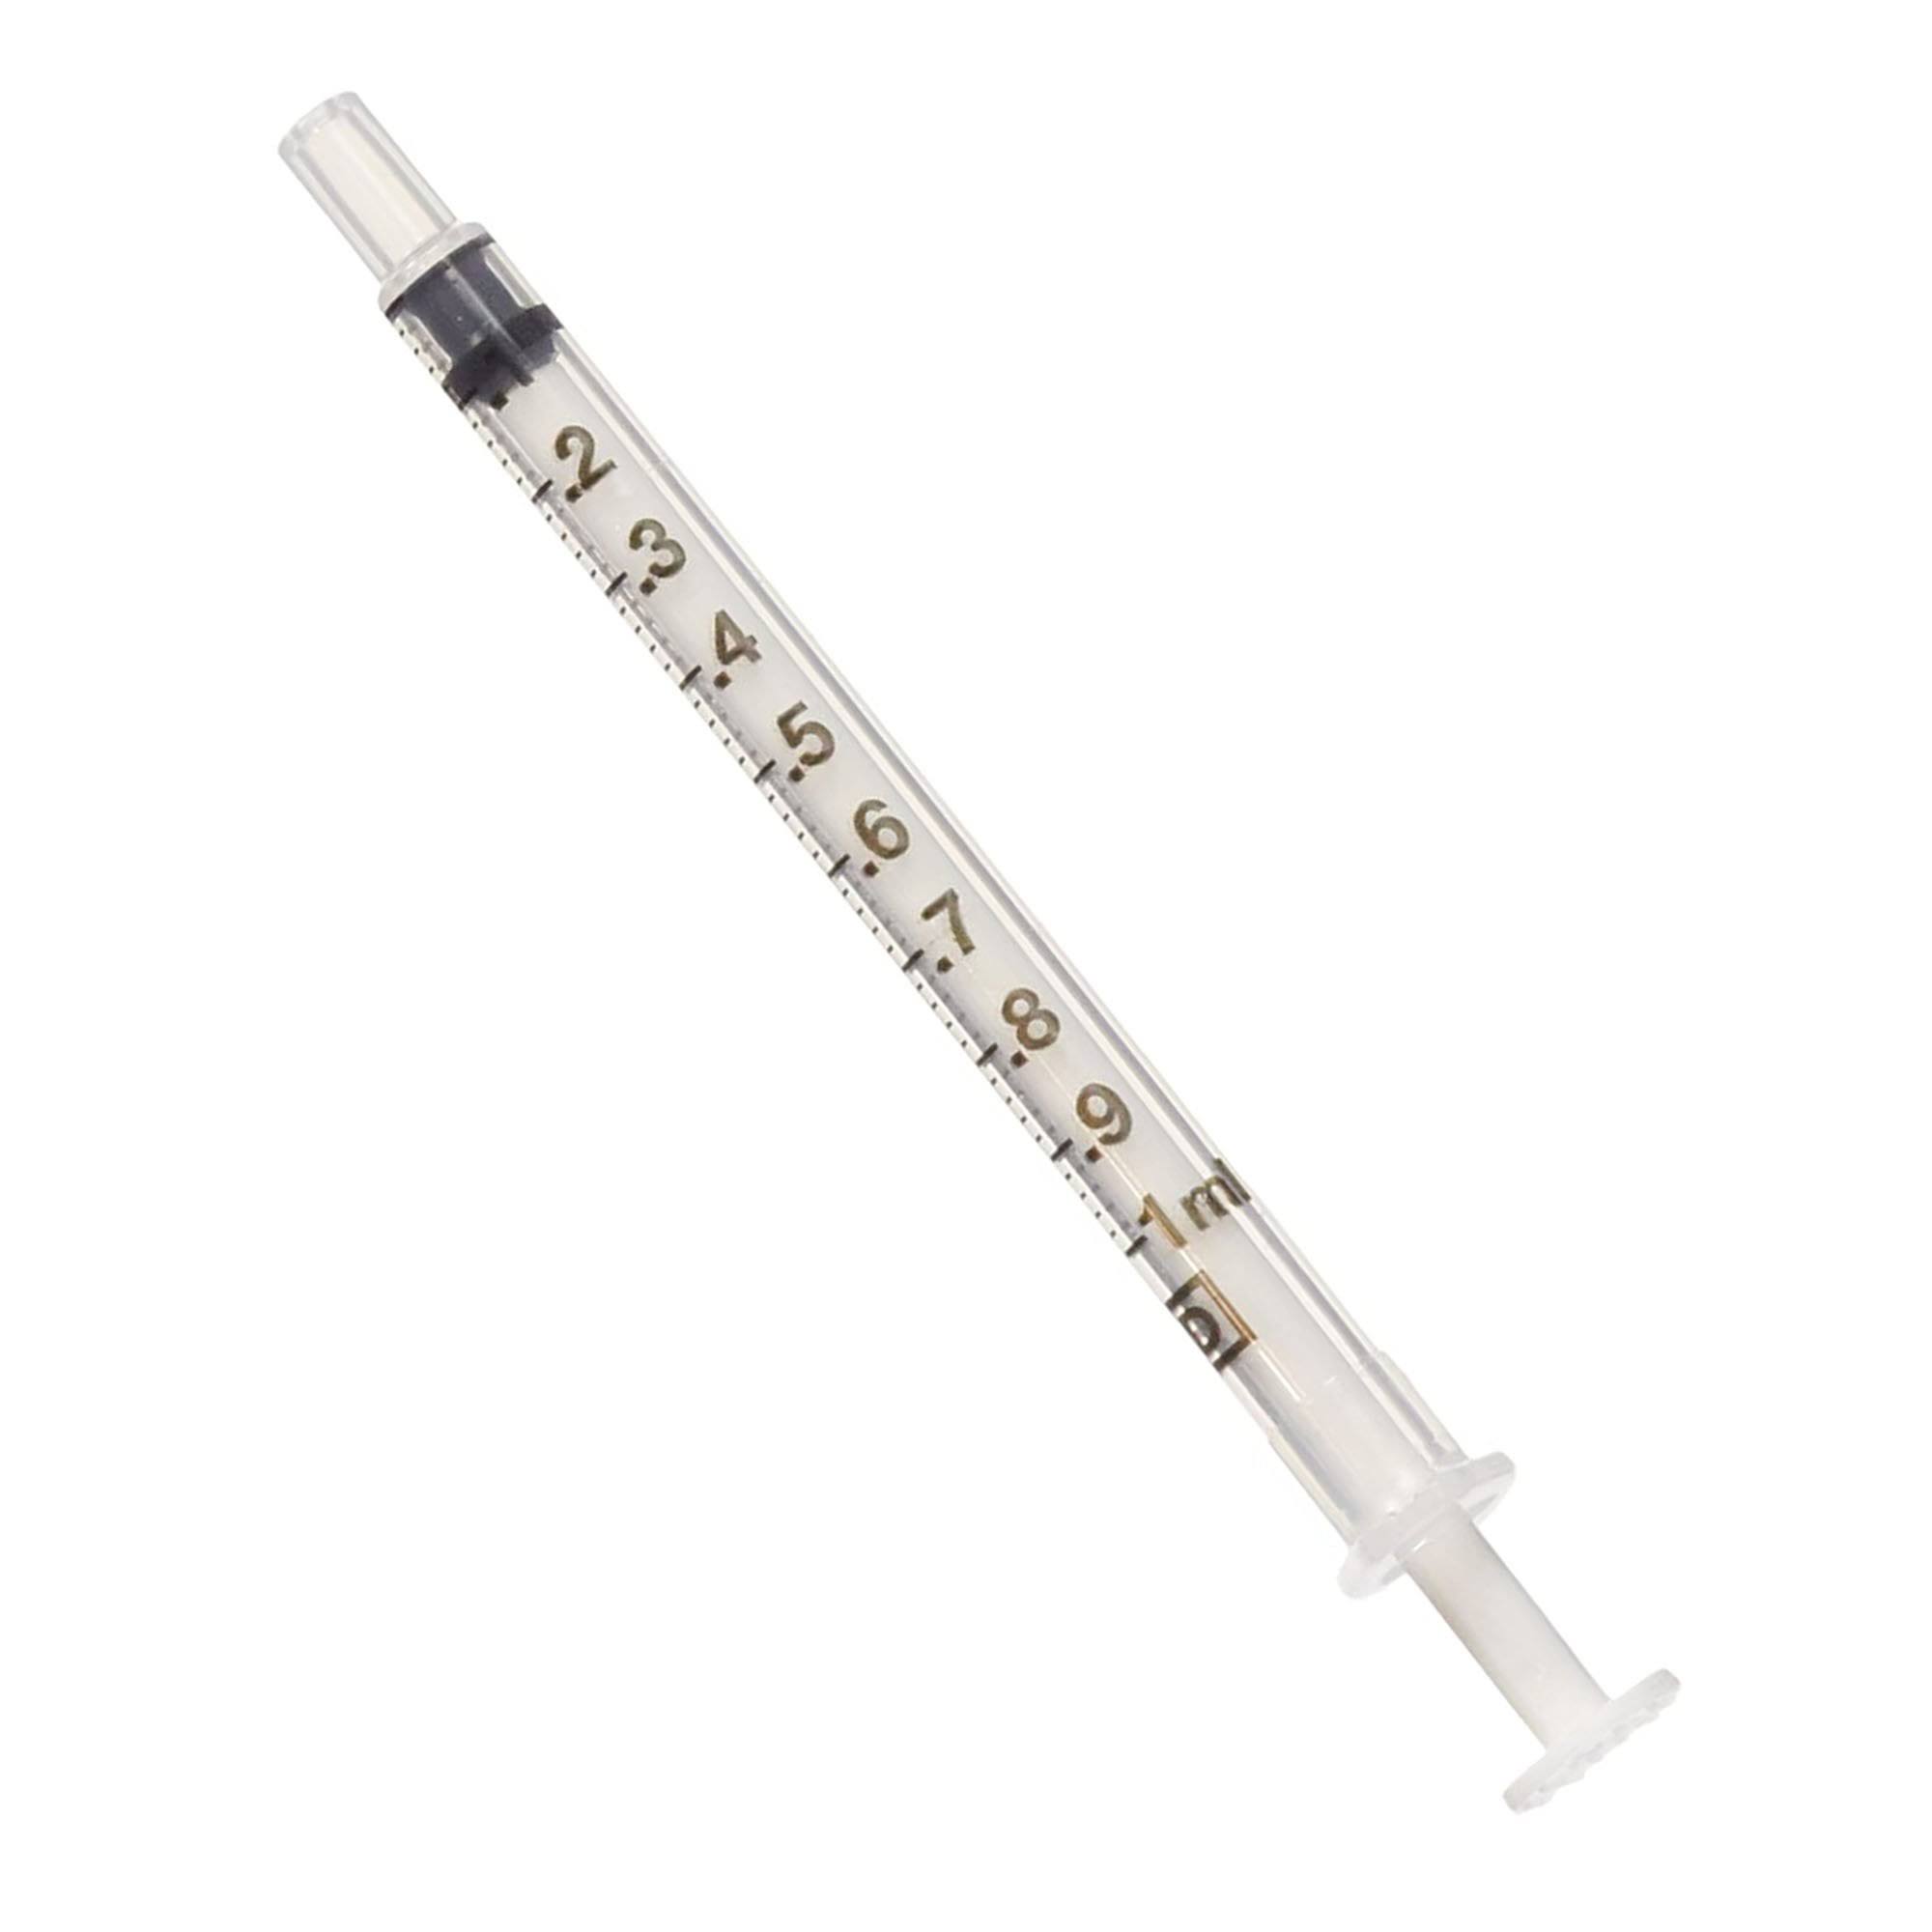 BD BD305217 Oral Syringes - Clear, 1ml, 500/Ca, with Tip Cap